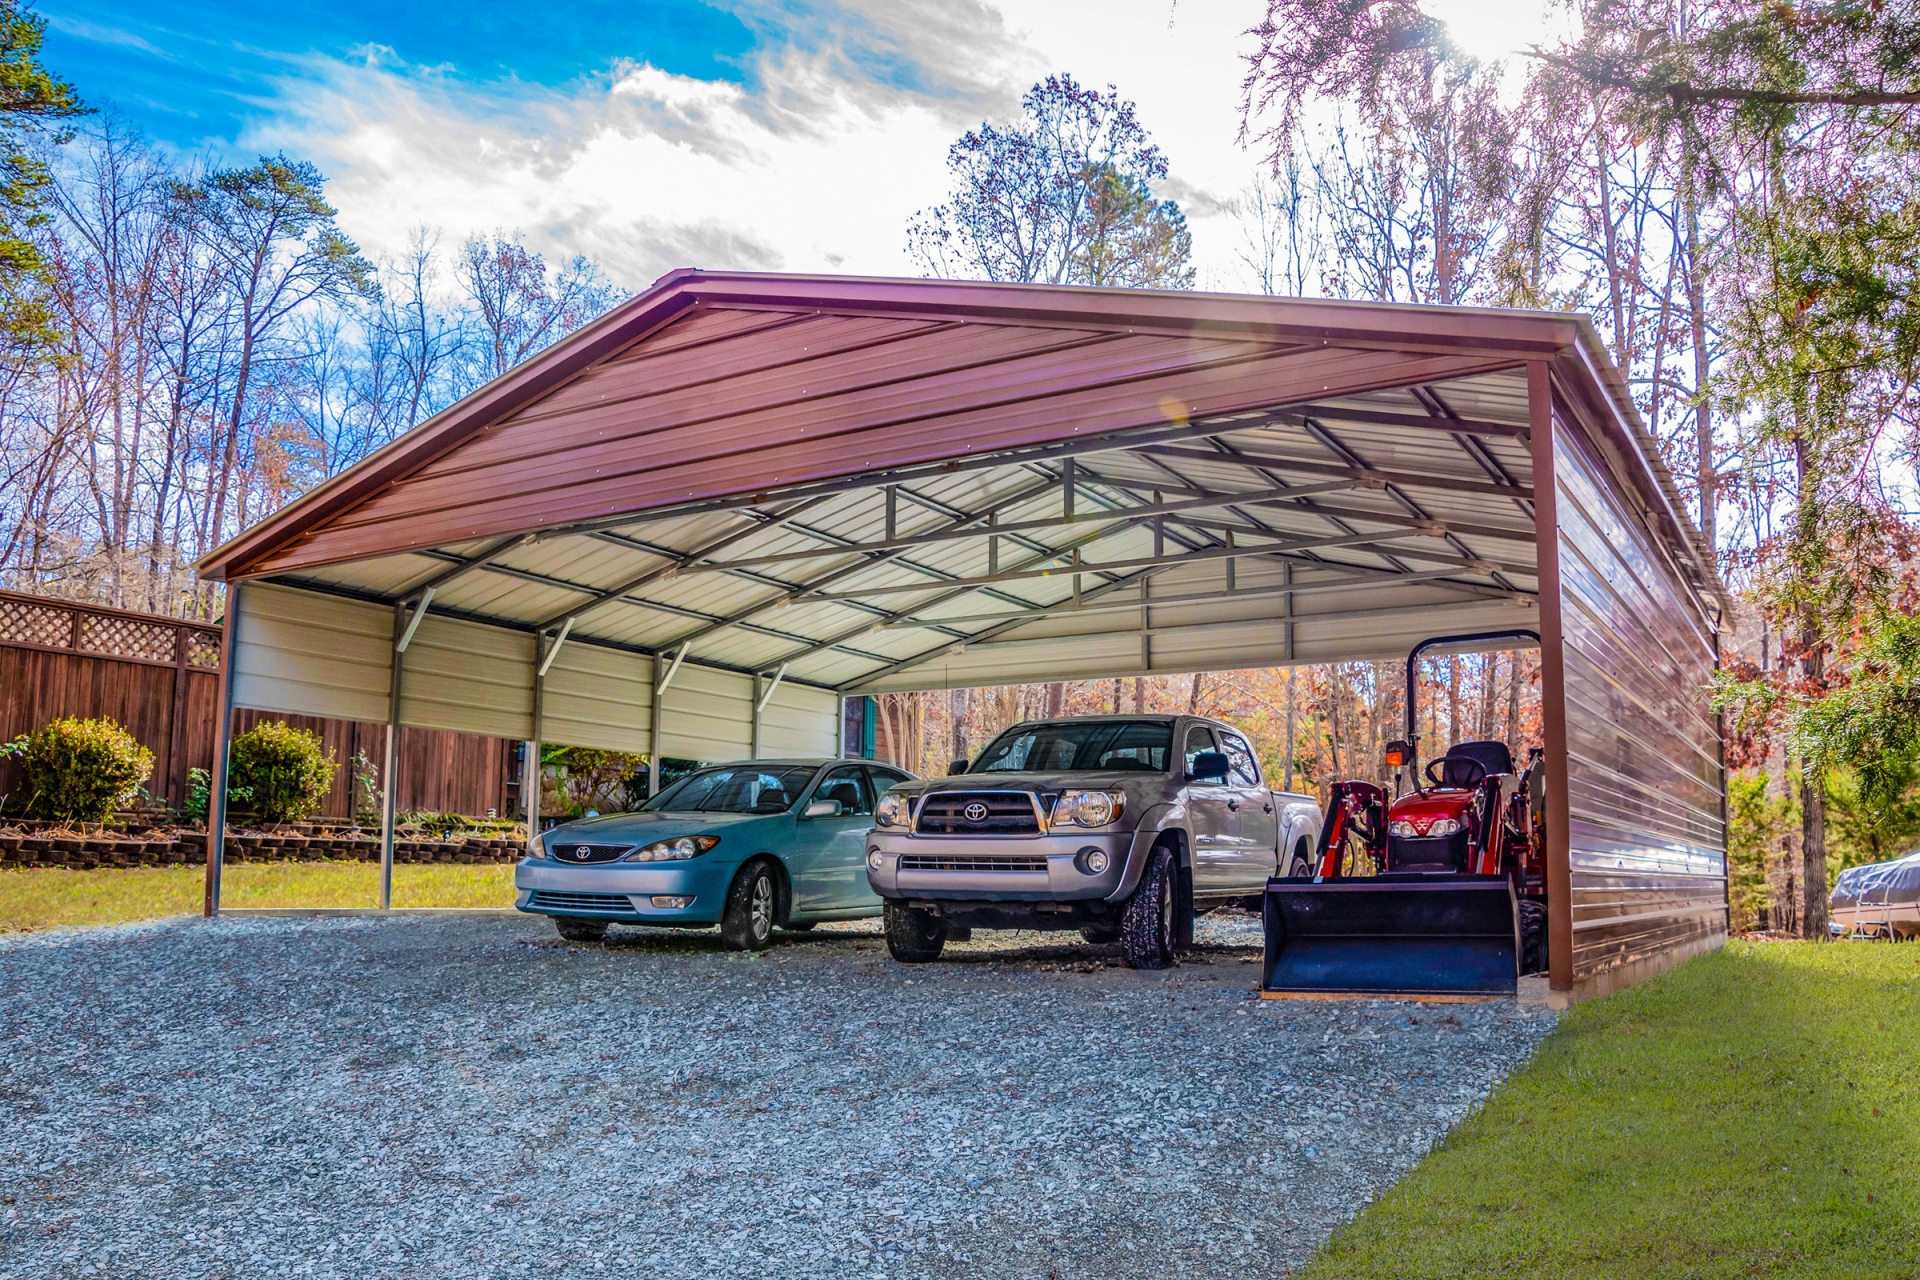 Carports provide protection for your investments